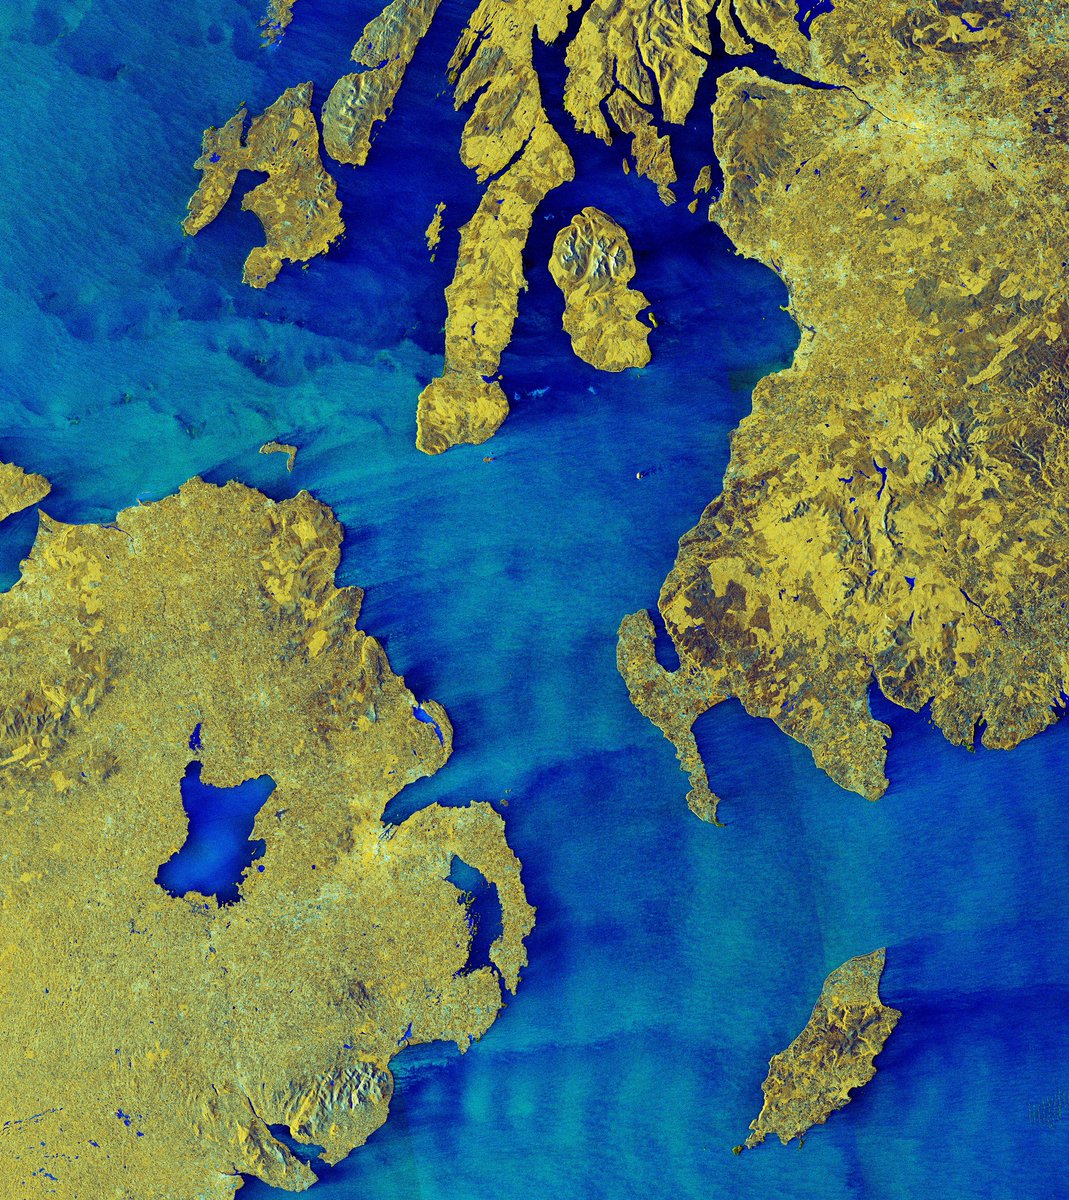 📷 This week's @ESA_EO #EarthFromSpace shows the North Channel, between Northern Ireland and Scotland, in this false-colour radar image taken by @CopernicusEU #Sentinel1.